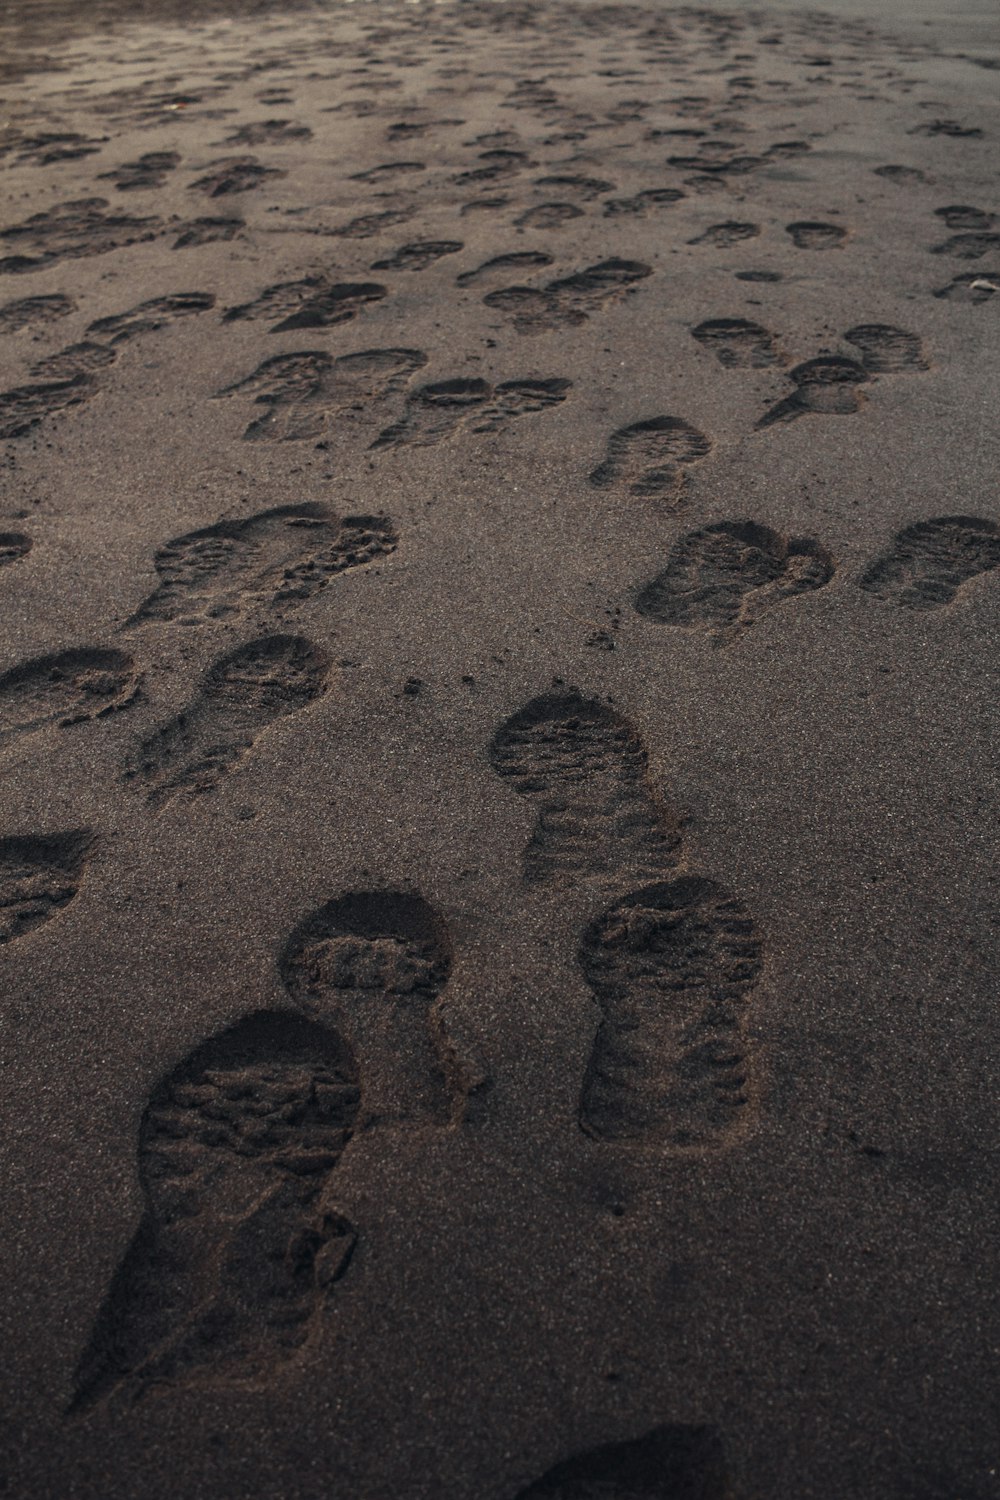 a group of feet in the sand